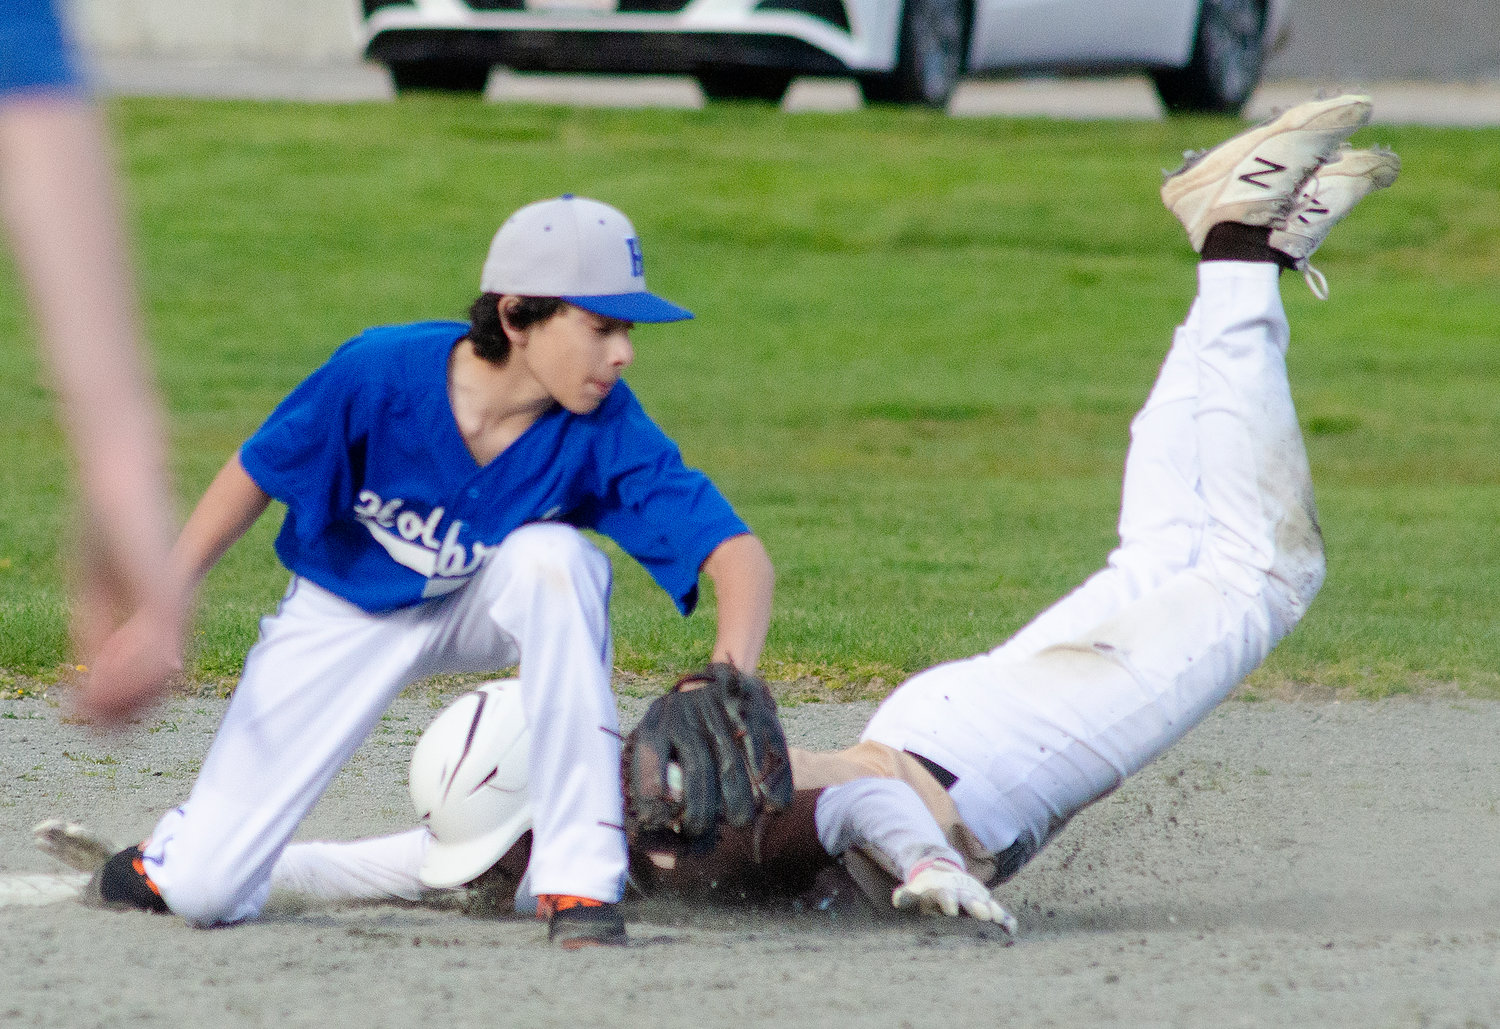 Cam Leary dives safely into second base for a stolen base in the first inning. Leary went 1 for 3 and scored two runs.